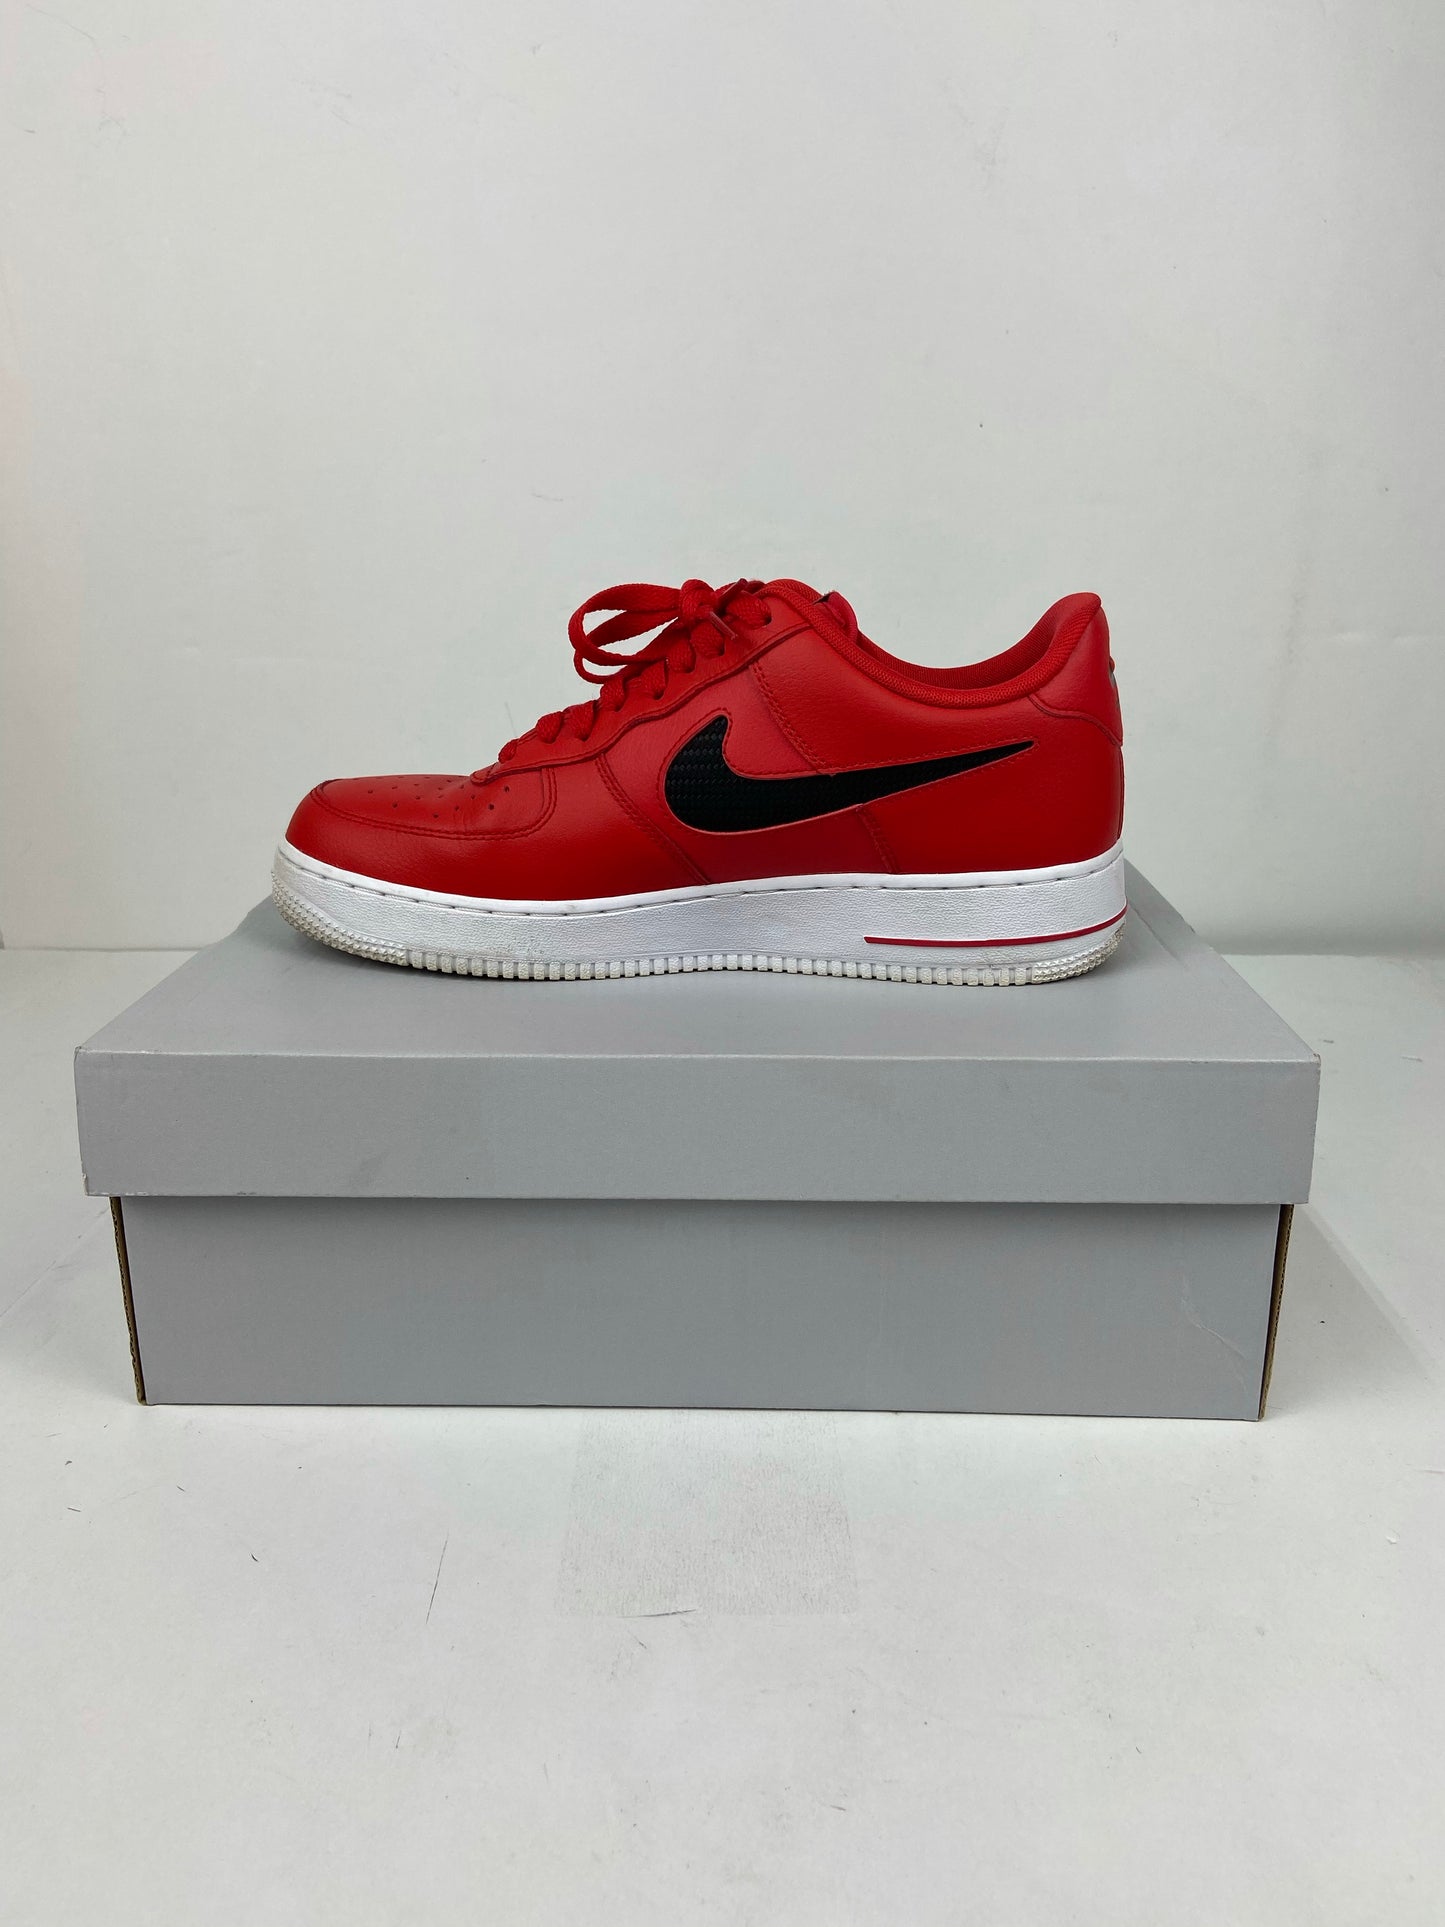 Used Air Force 1 '07 LV8 'Cut Out Swoosh - University Red' Sz 9.5